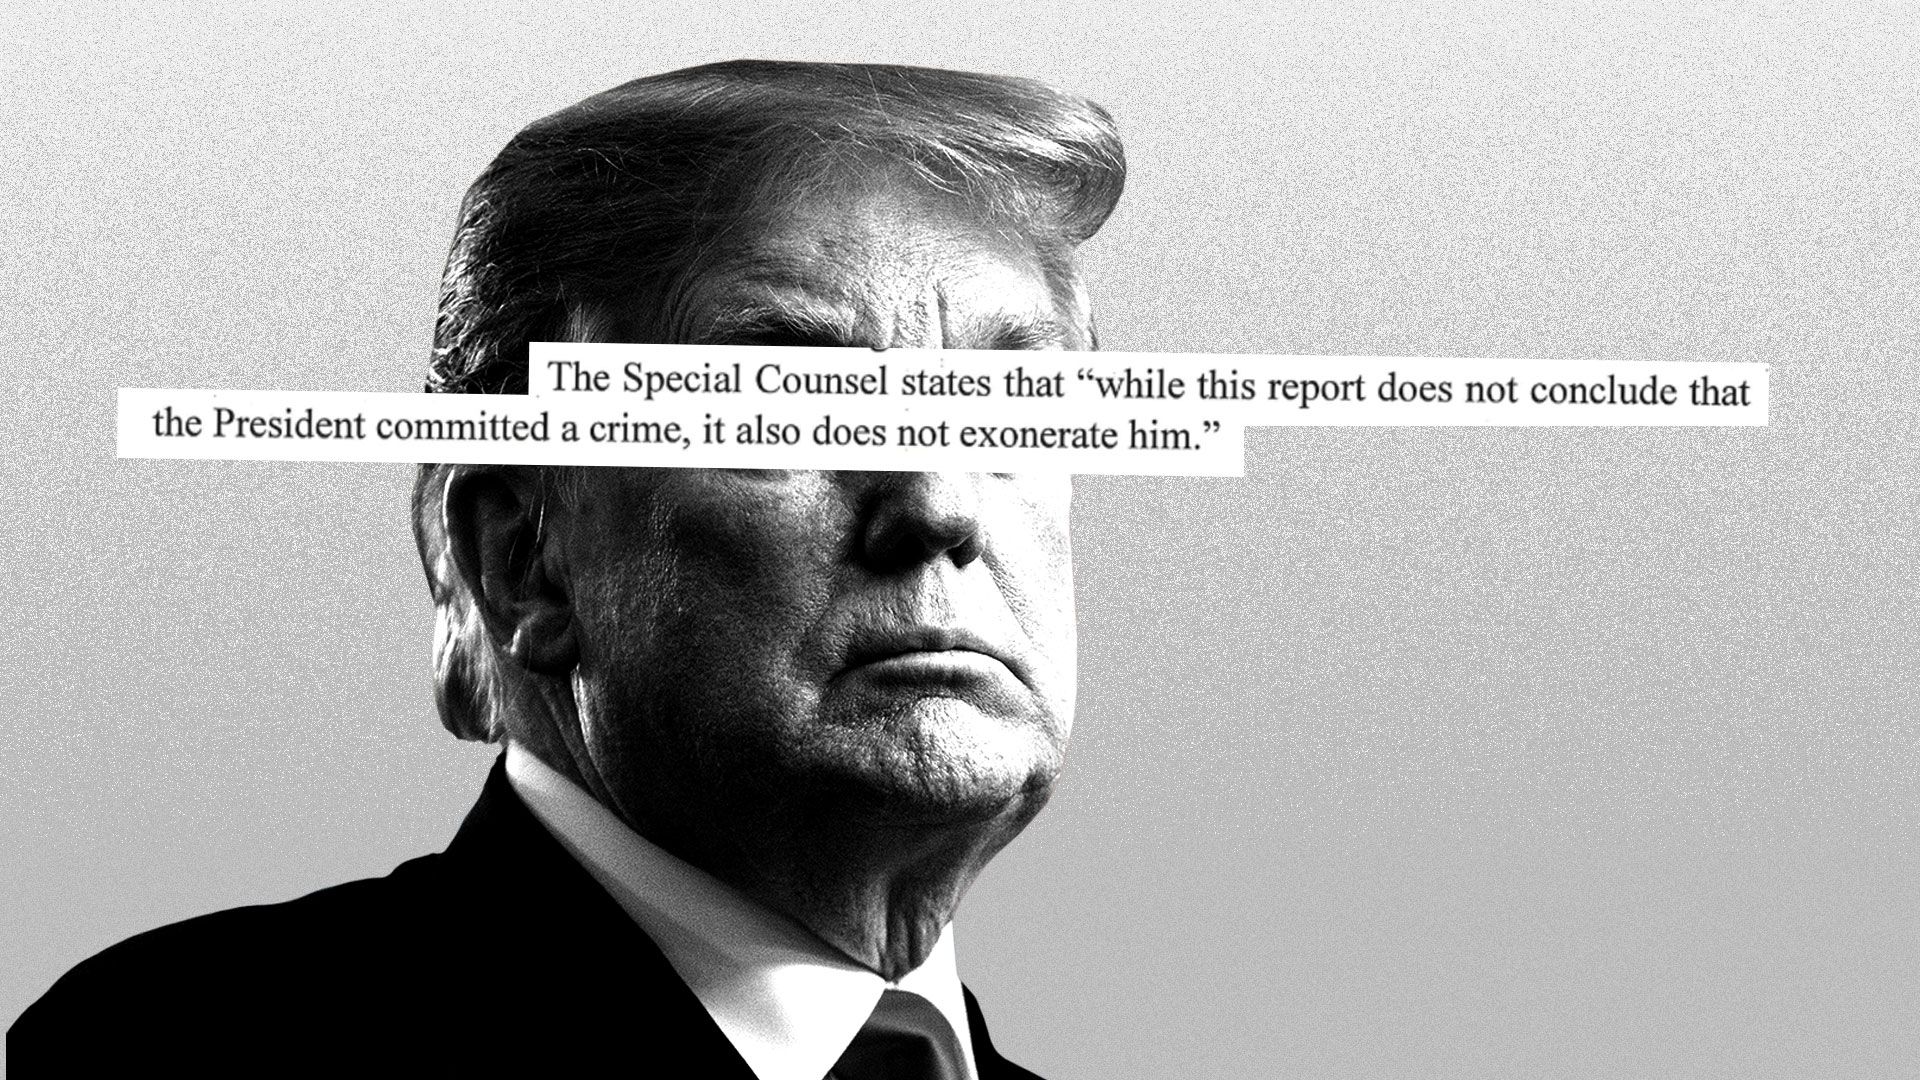 Illustration of Trump with, "The Special Counsel states that, 'while this report does not conclude that the President committed a crime, it also does not exonerate him'" printed over his face.